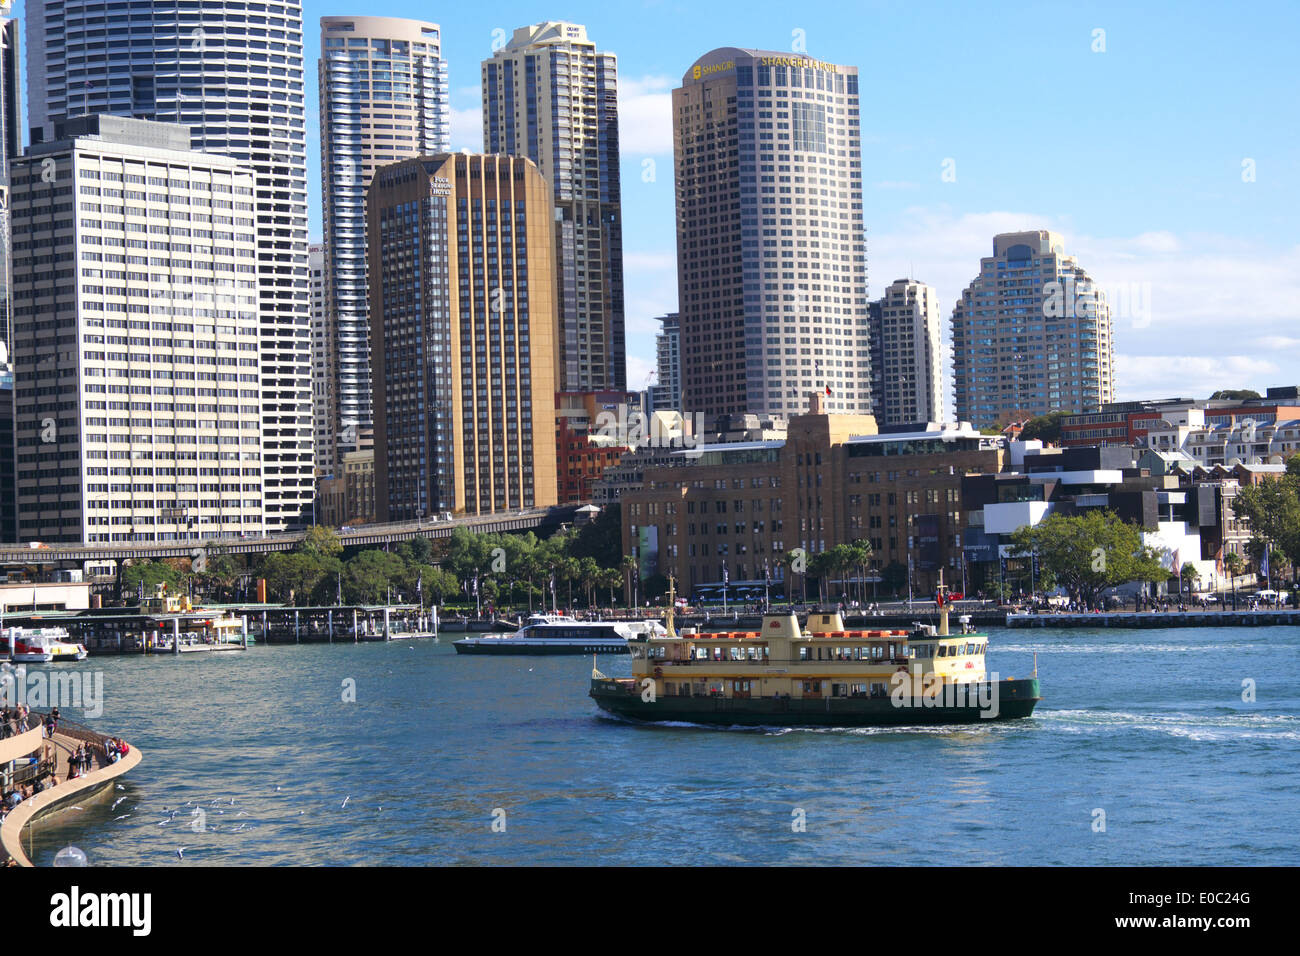 Sydney circular quay and Sydney harbour with view of high rise city centre office skyscrapers, NSW,Australia Stock Photo